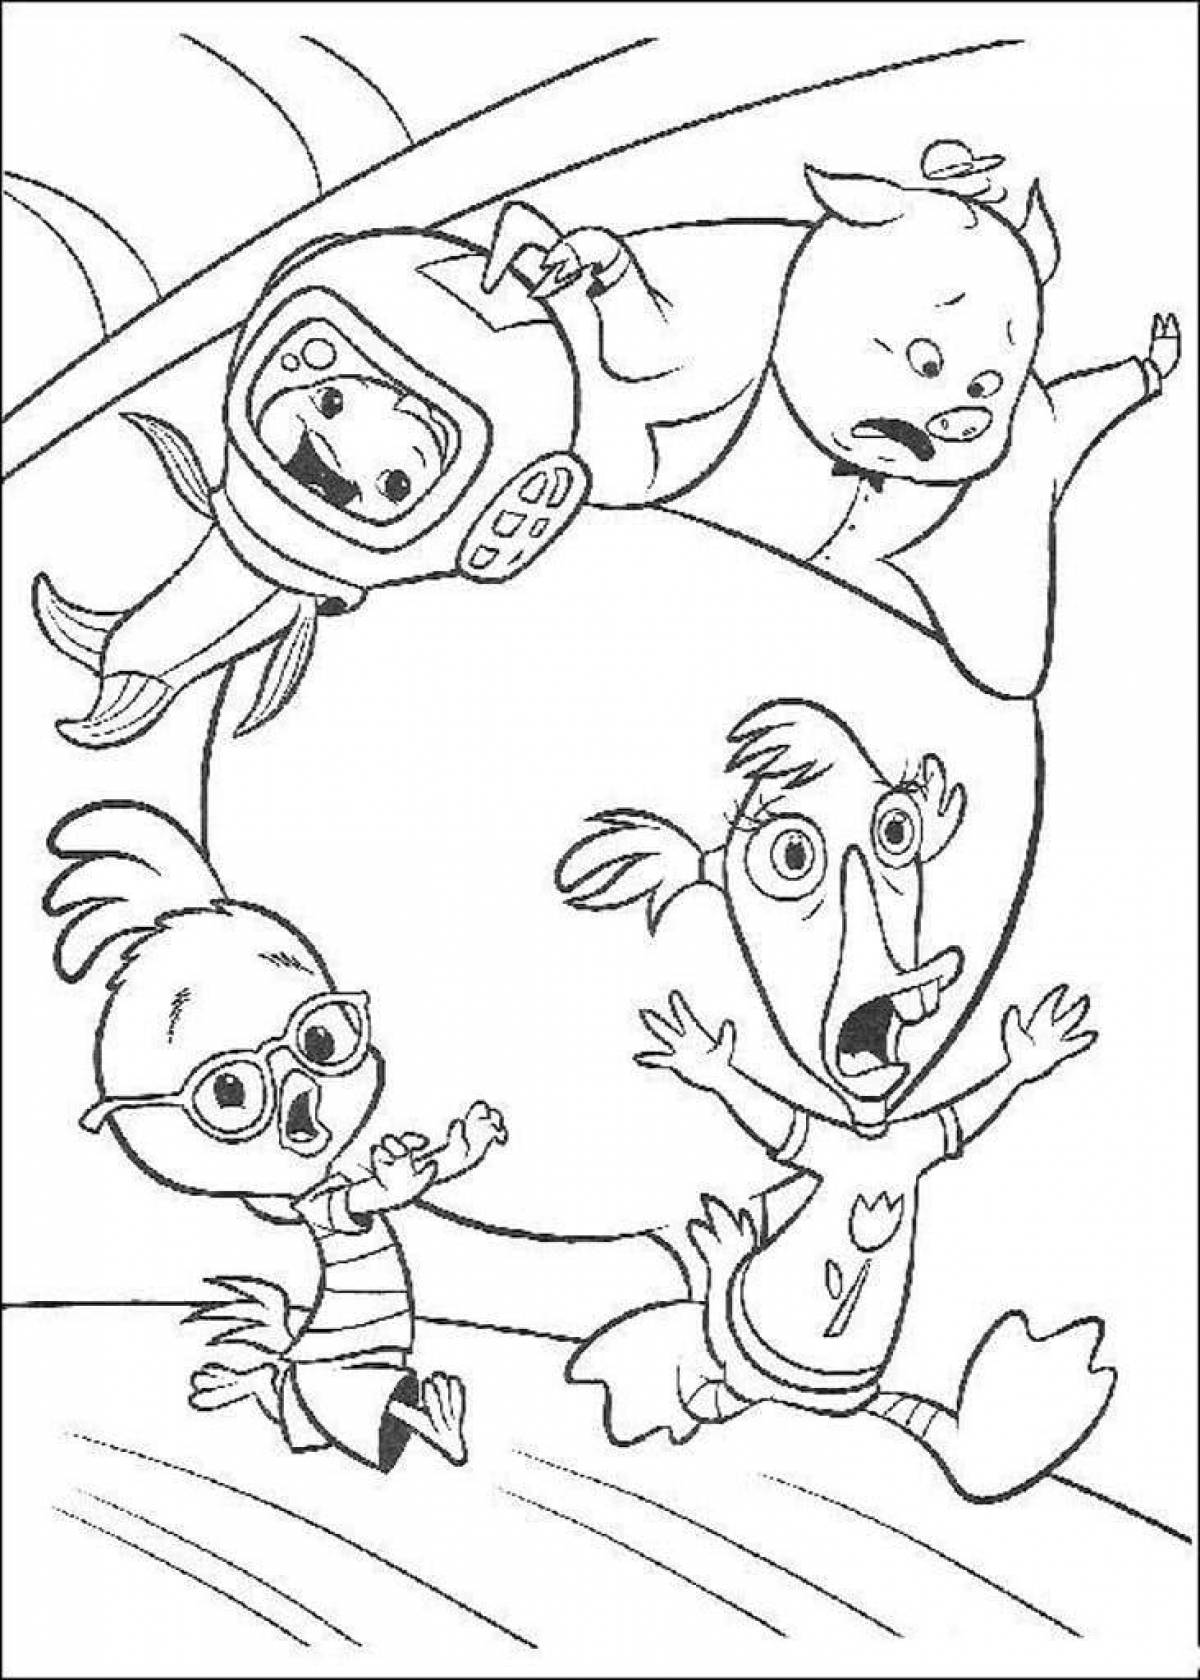 Smiling chick coloring book